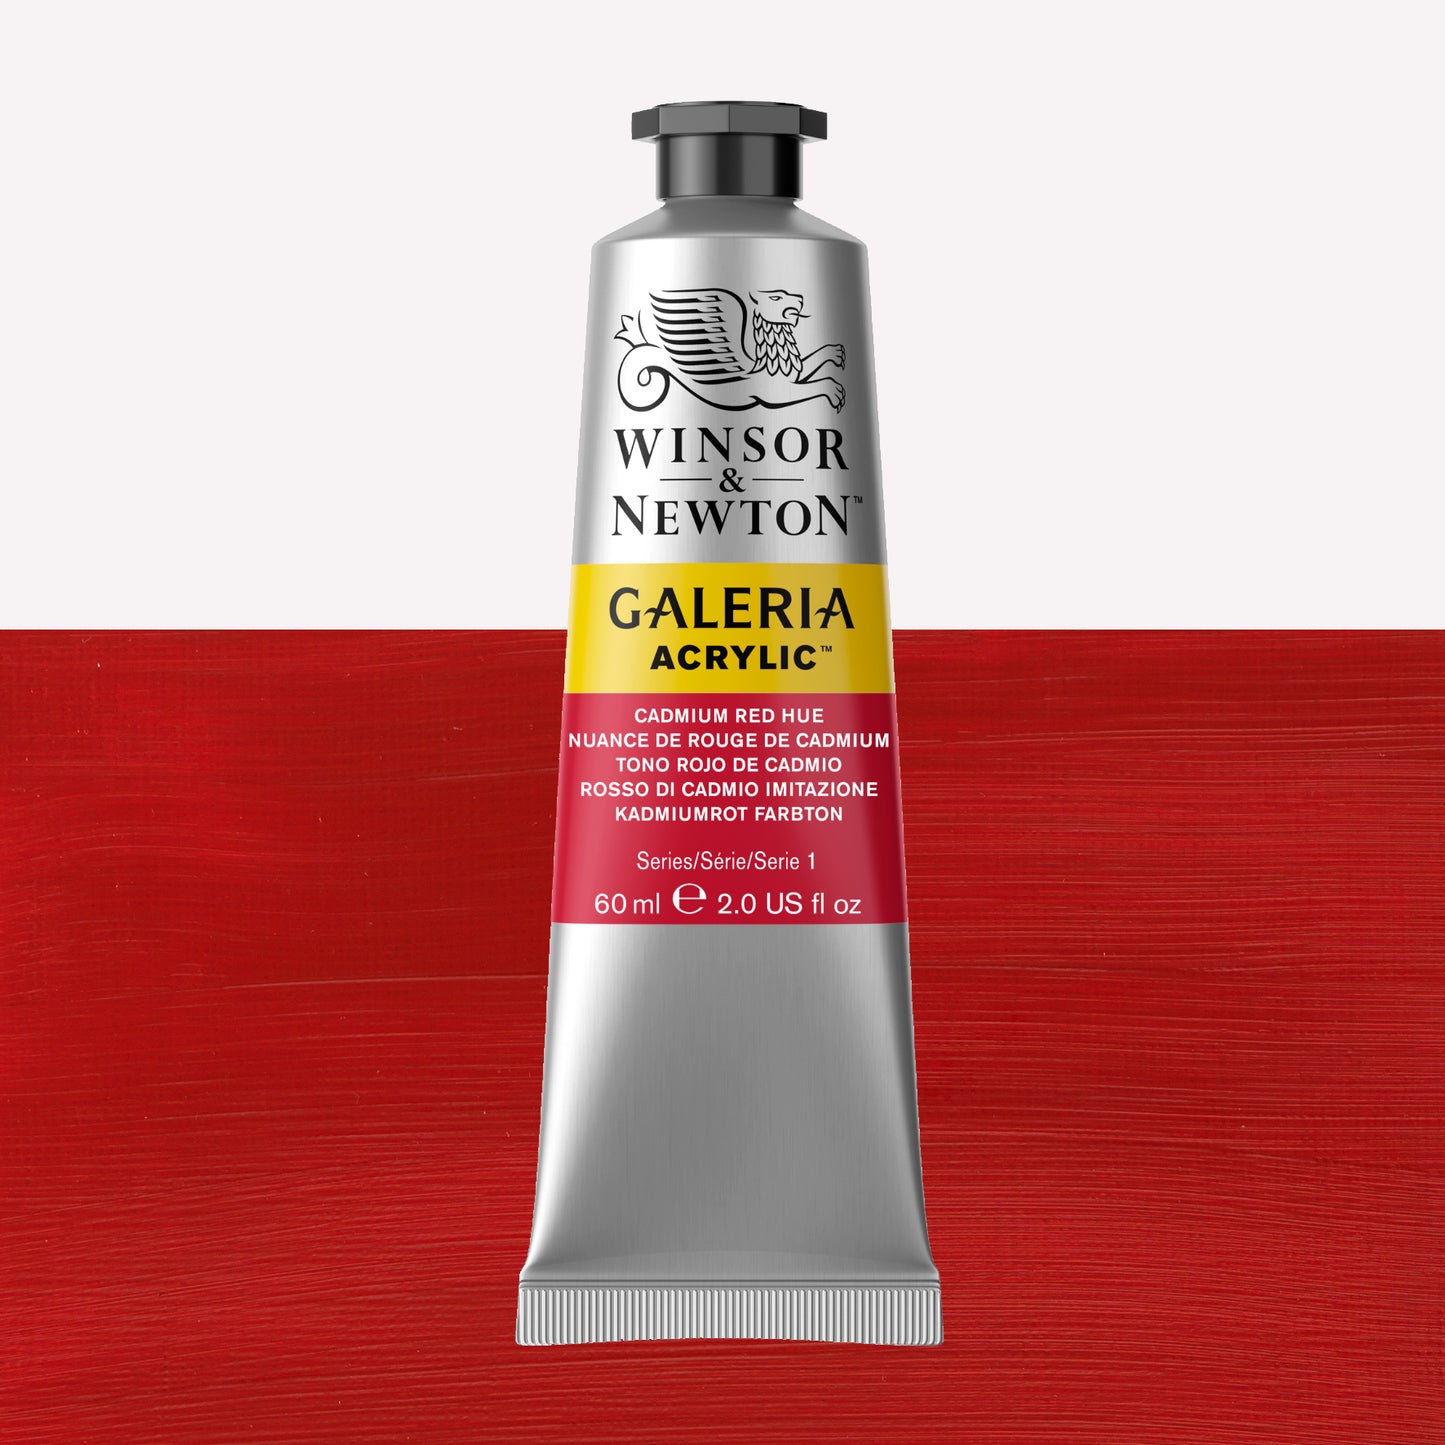 A 60ml tube of vibrant Galeria Acrylic paint in the shade Cadmium Red Hue. This paint, made by Winsor and Newton, is packaged in a silver tube with a black lid. 